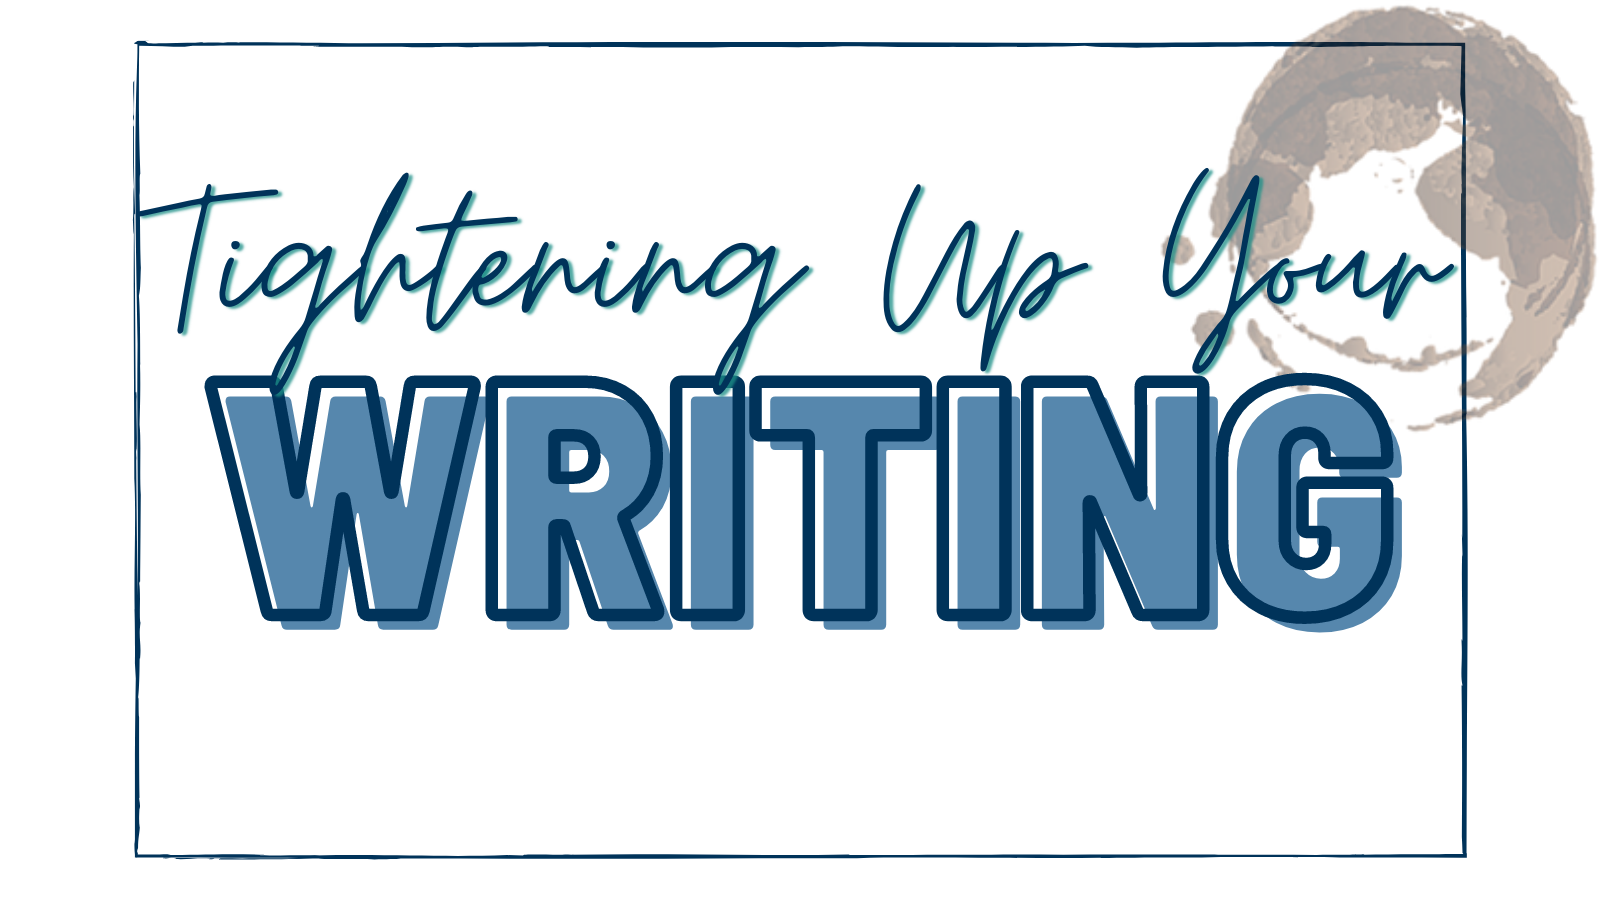 "Tightening Up Your Writing"